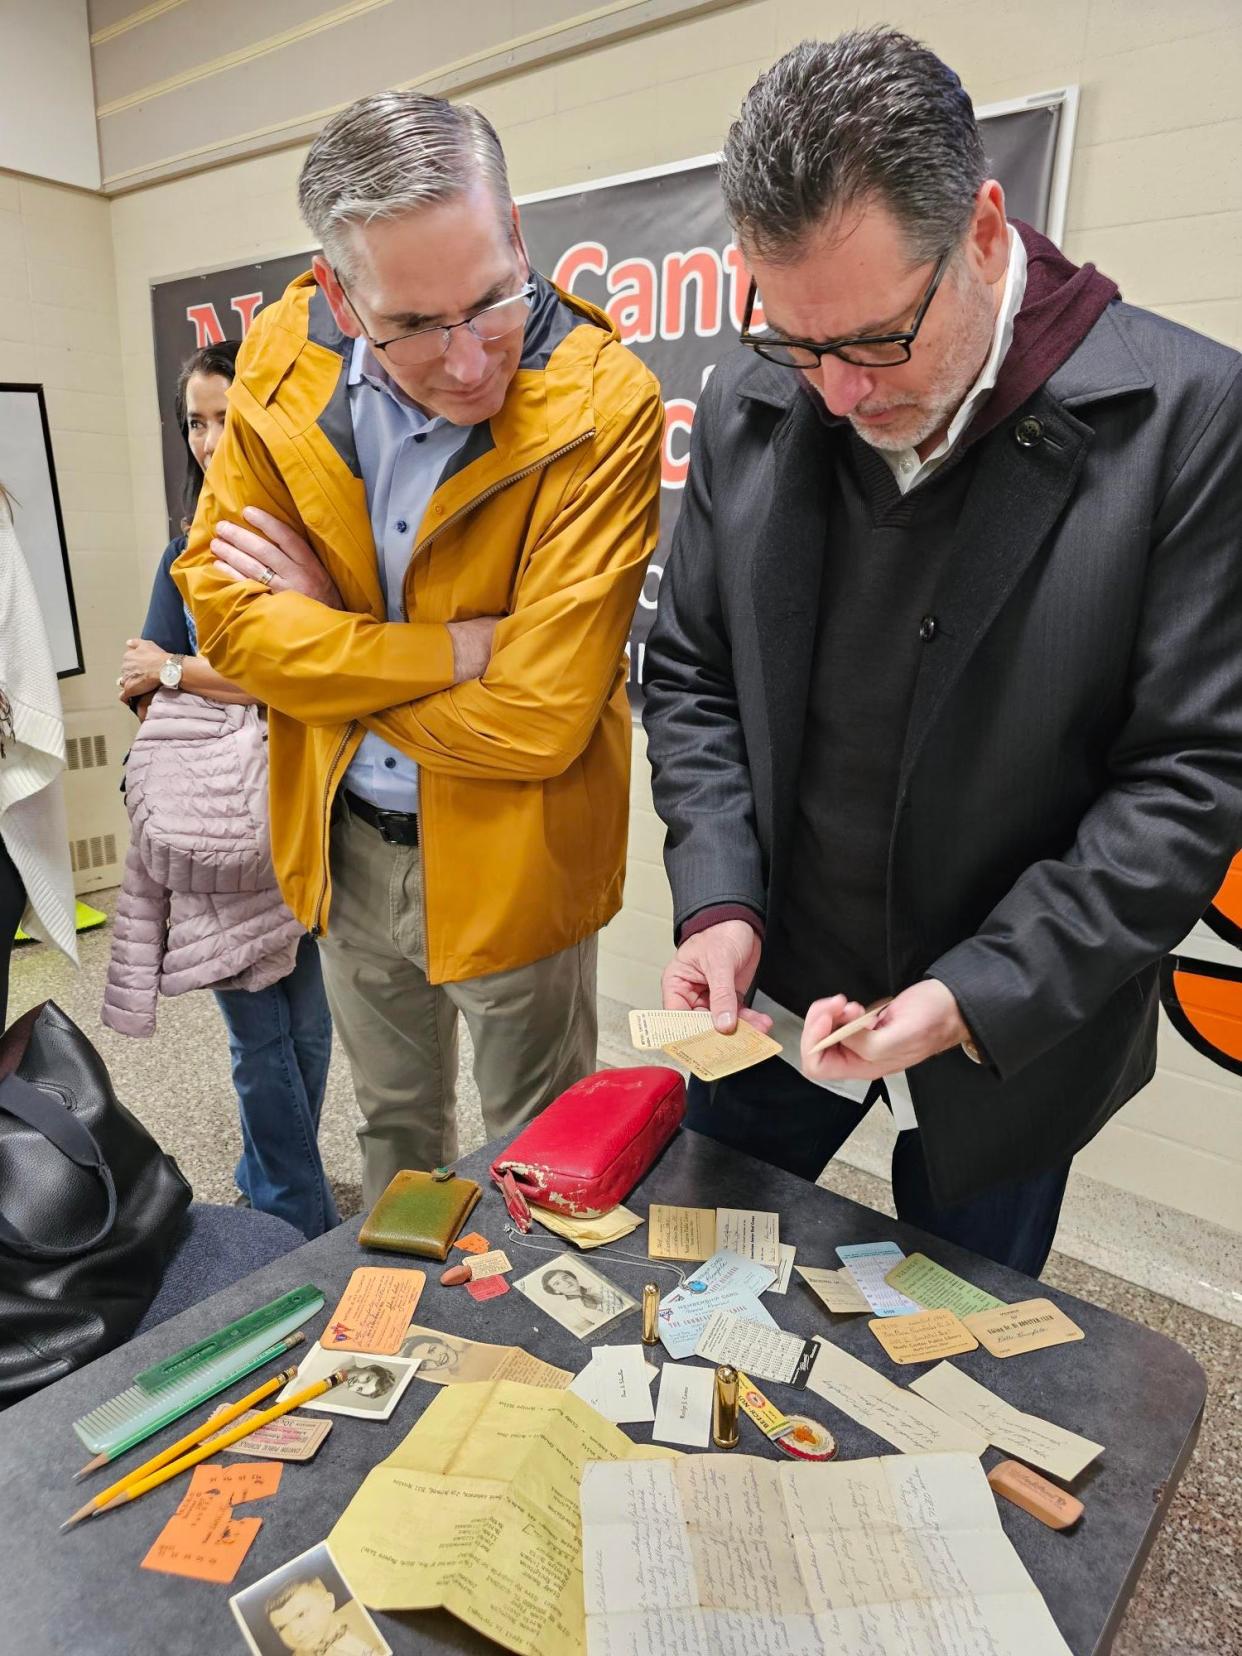 Emory, left, and Charles Anderson look over black and white photos, newspaper clippings, membership cards and other items found in a purse owned by their mother Patti Rumfola. While a student at Hoover High School in the late 1950s, Rumfola's purse was lost between a wall and a set of lockers.